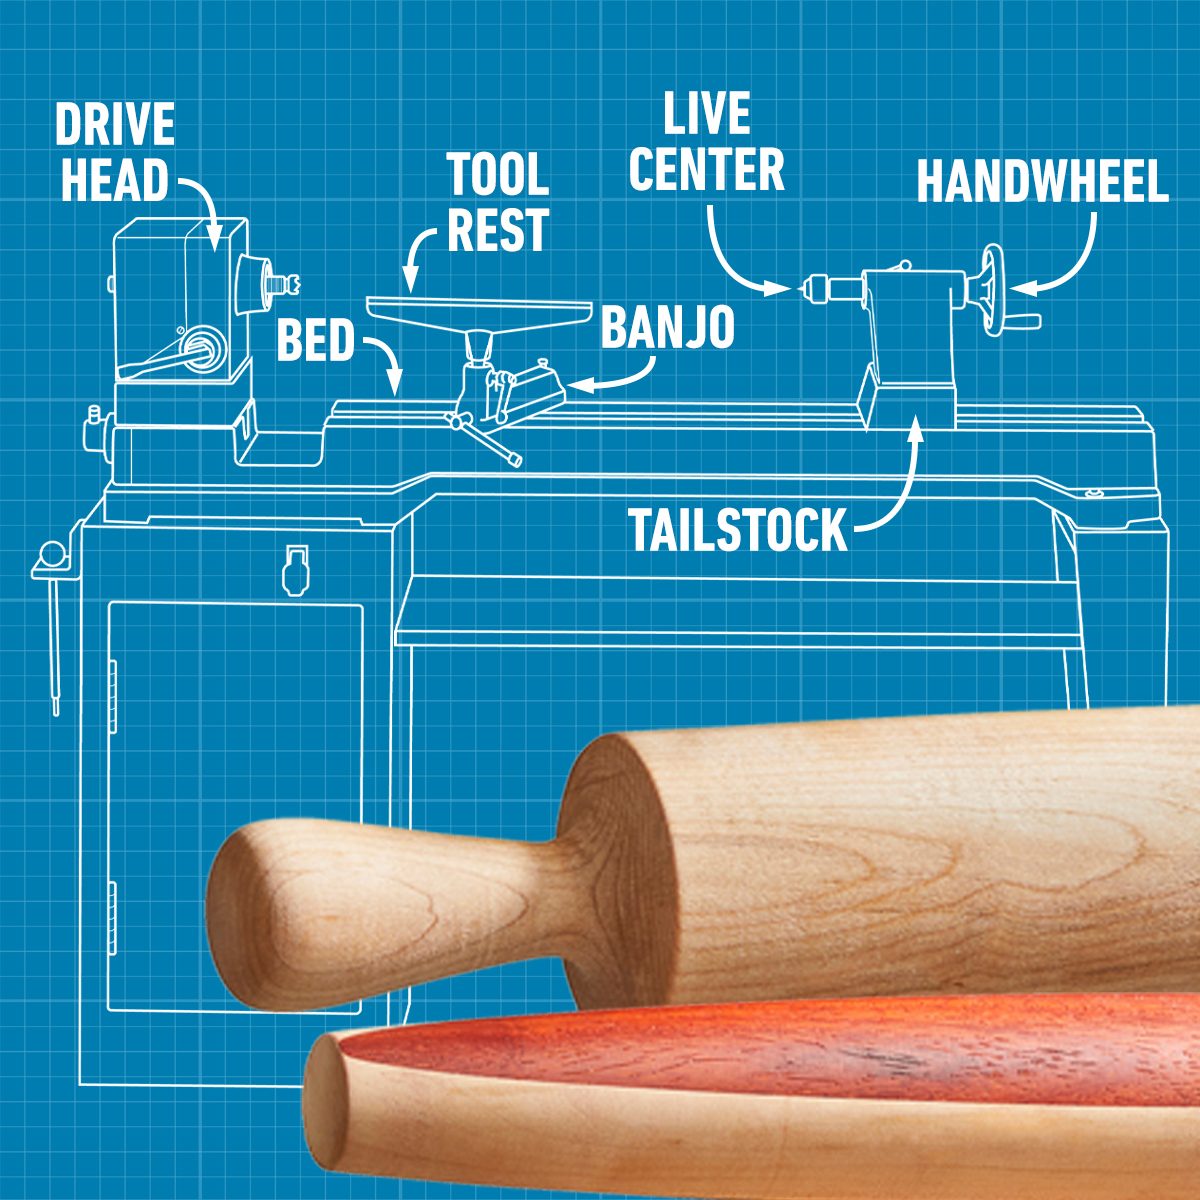 Fh23djf 622 54 086 Hsp How To Wood Turn An Elegant Rolling Pin